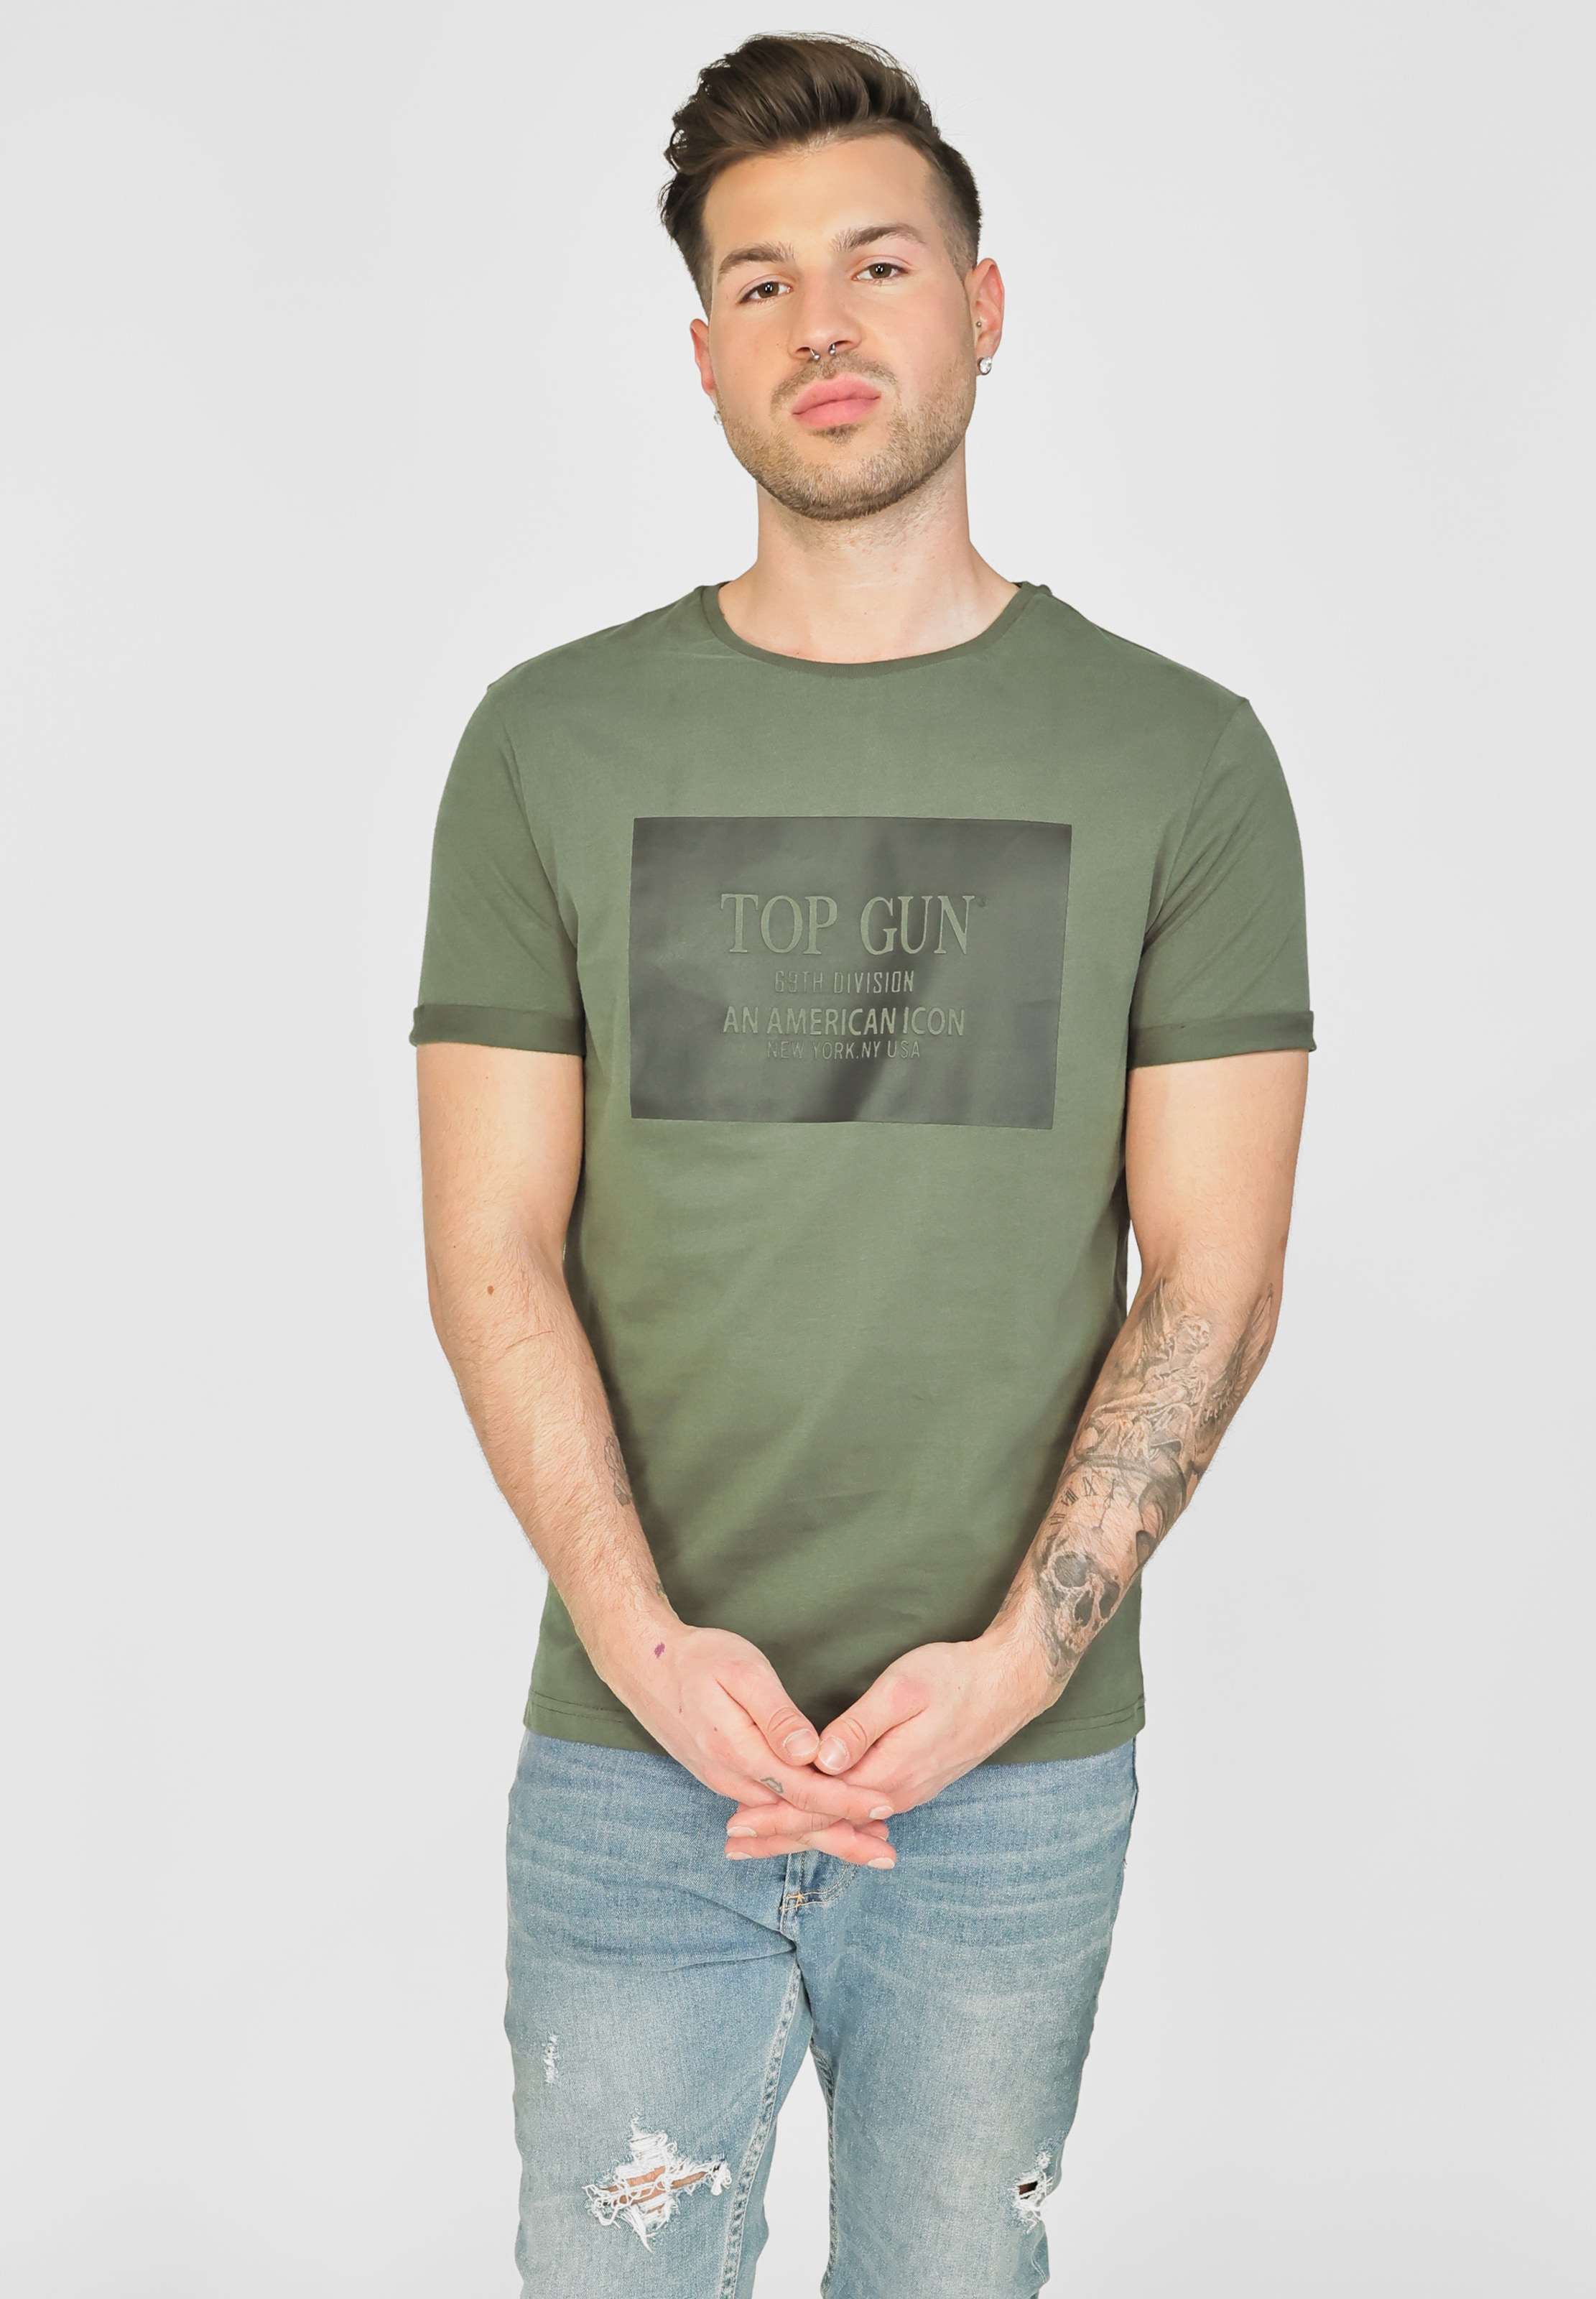 Olive GUN ABOUT TOP in YOU | \'TG20213011\' Shirt